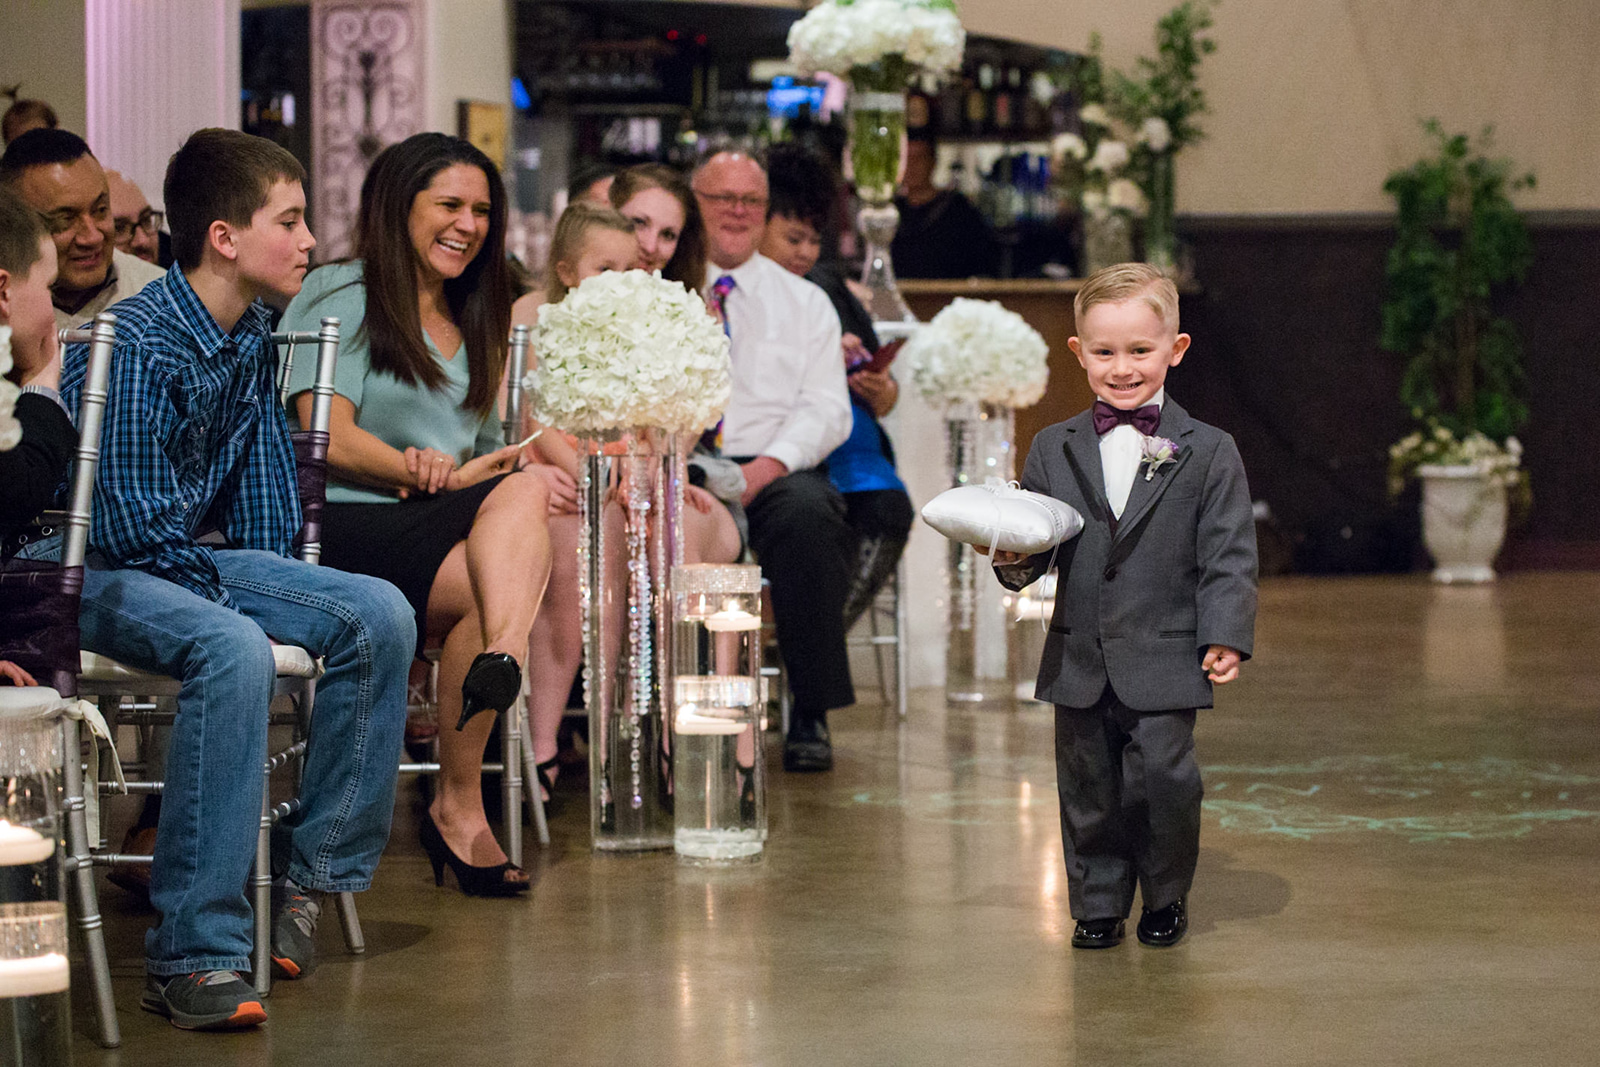 The Ultimate Wedding Ceremony Checklist - Wedding Ceremony Adorable Ring Bearer with pillow